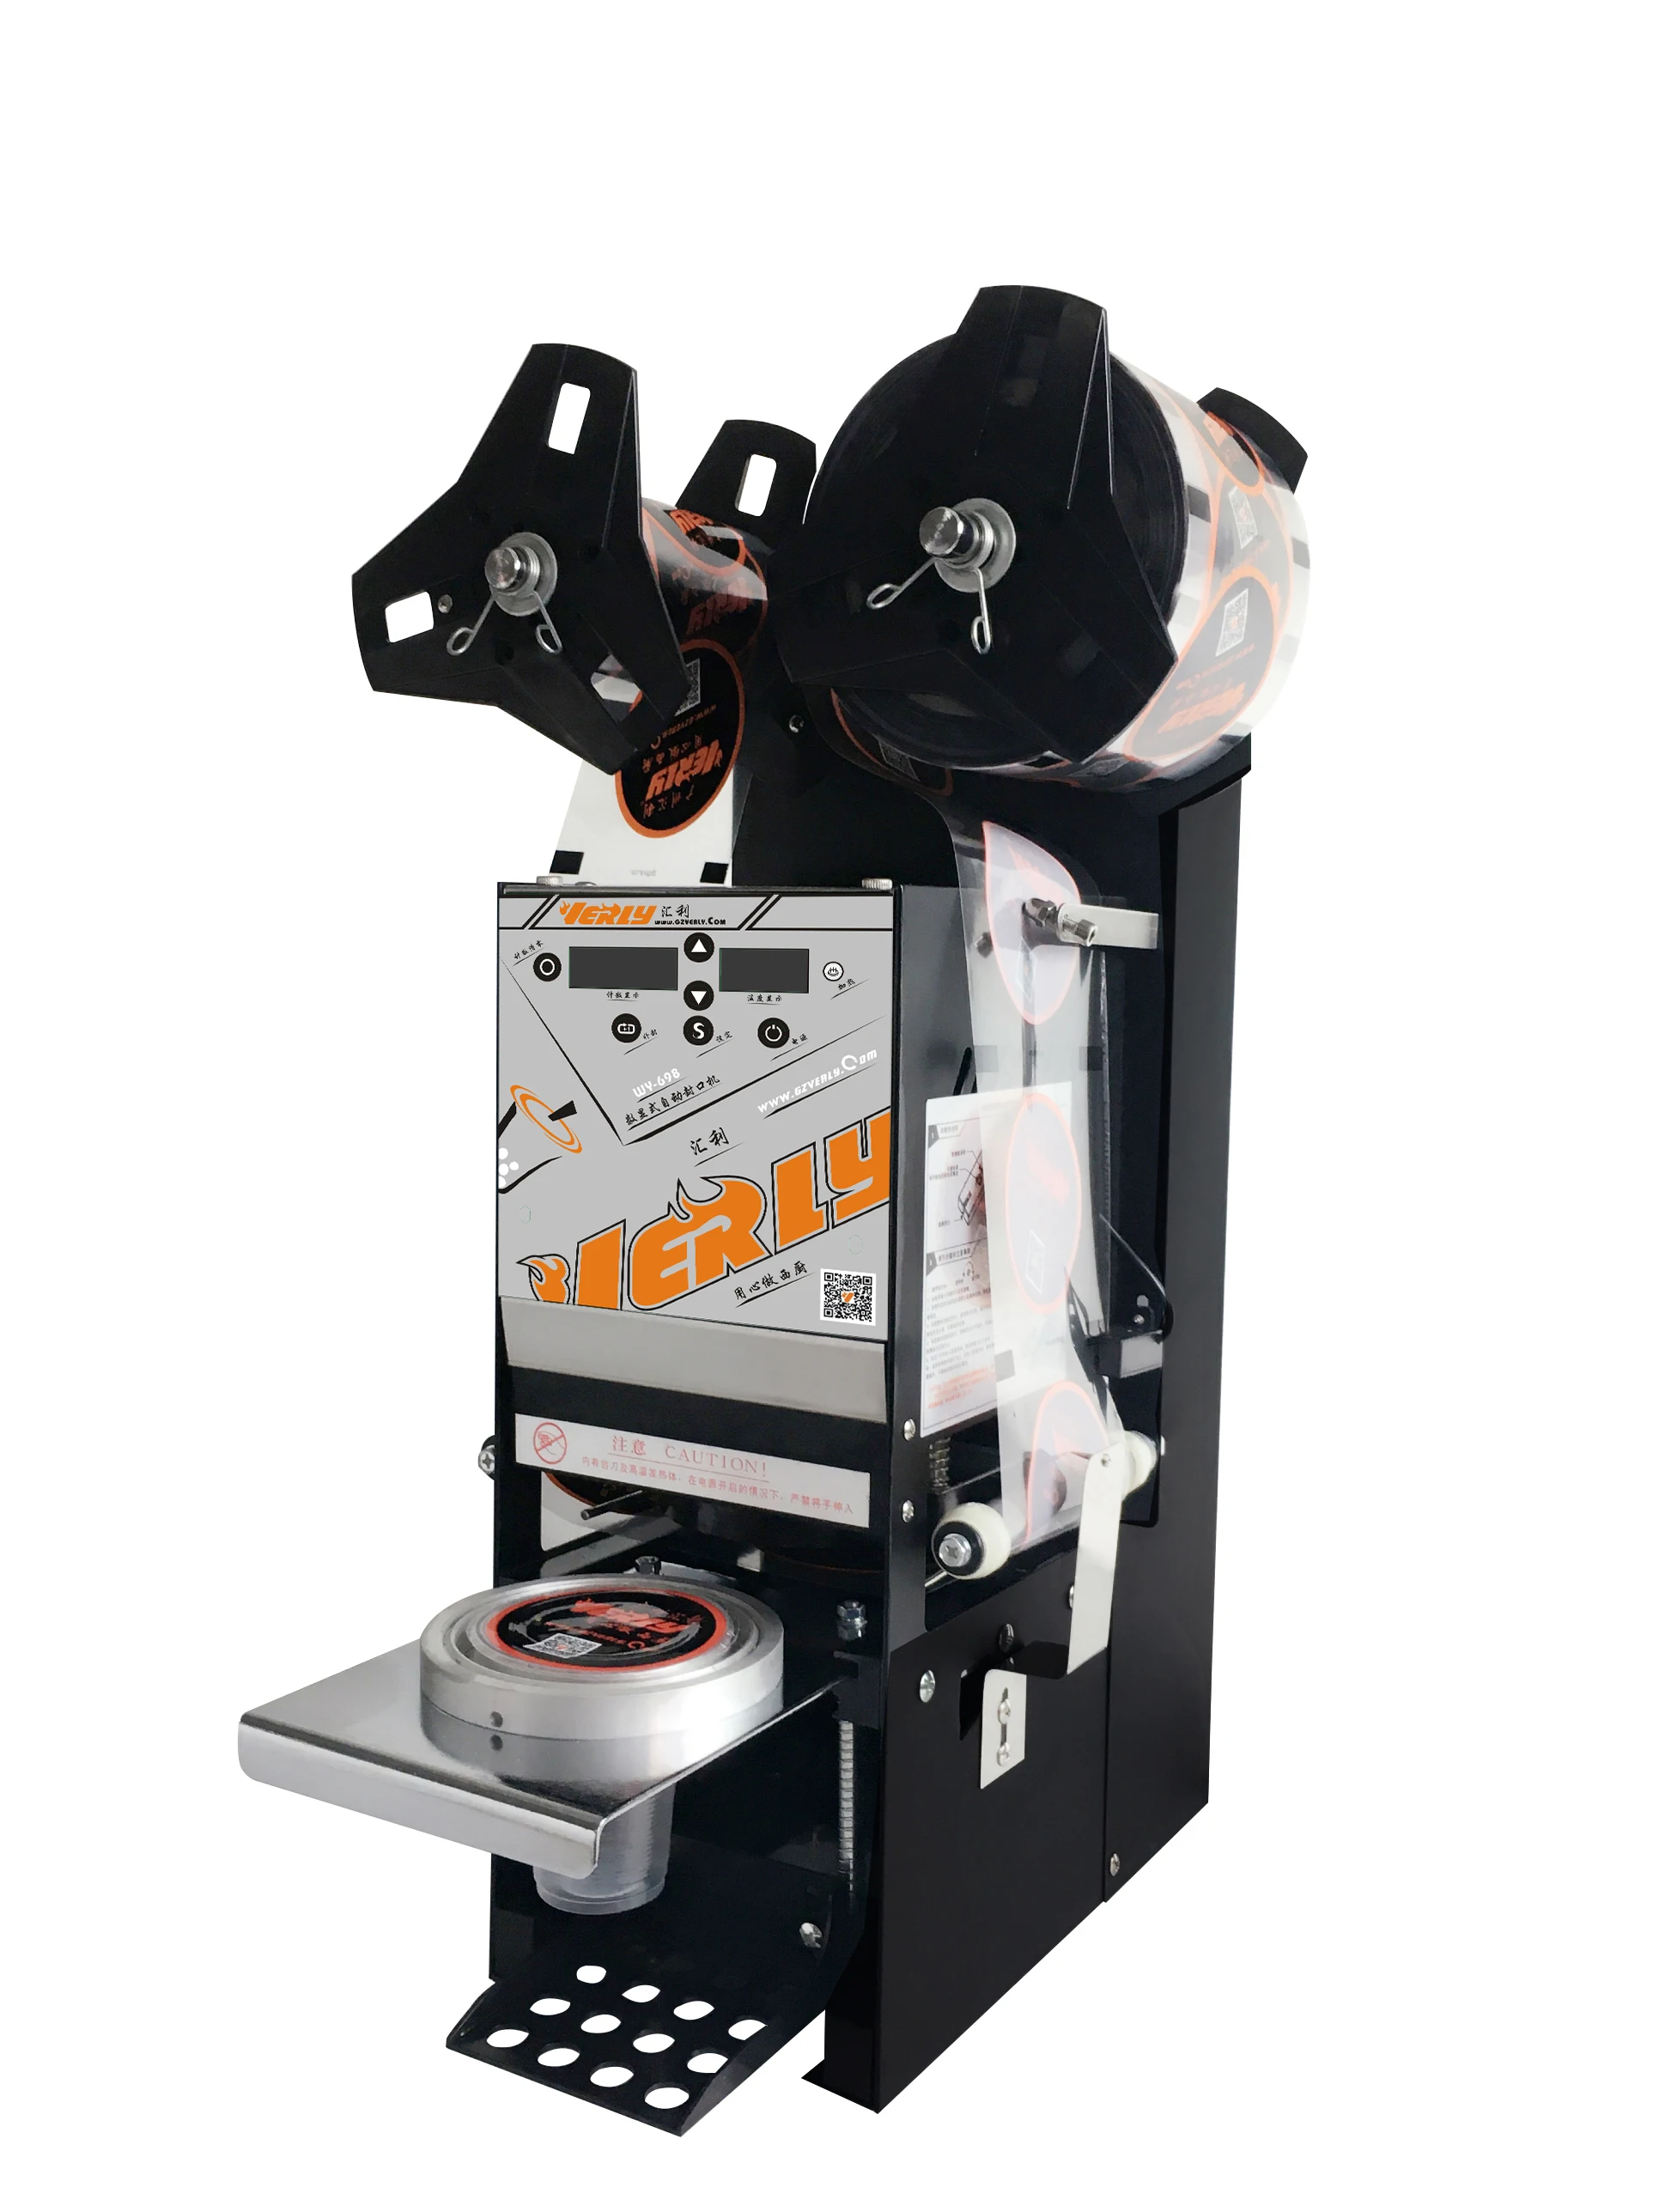 Details about   Commercial Fully Automatic Bubble Tea Cup Sealing Machine,Plastic Cup Sealer